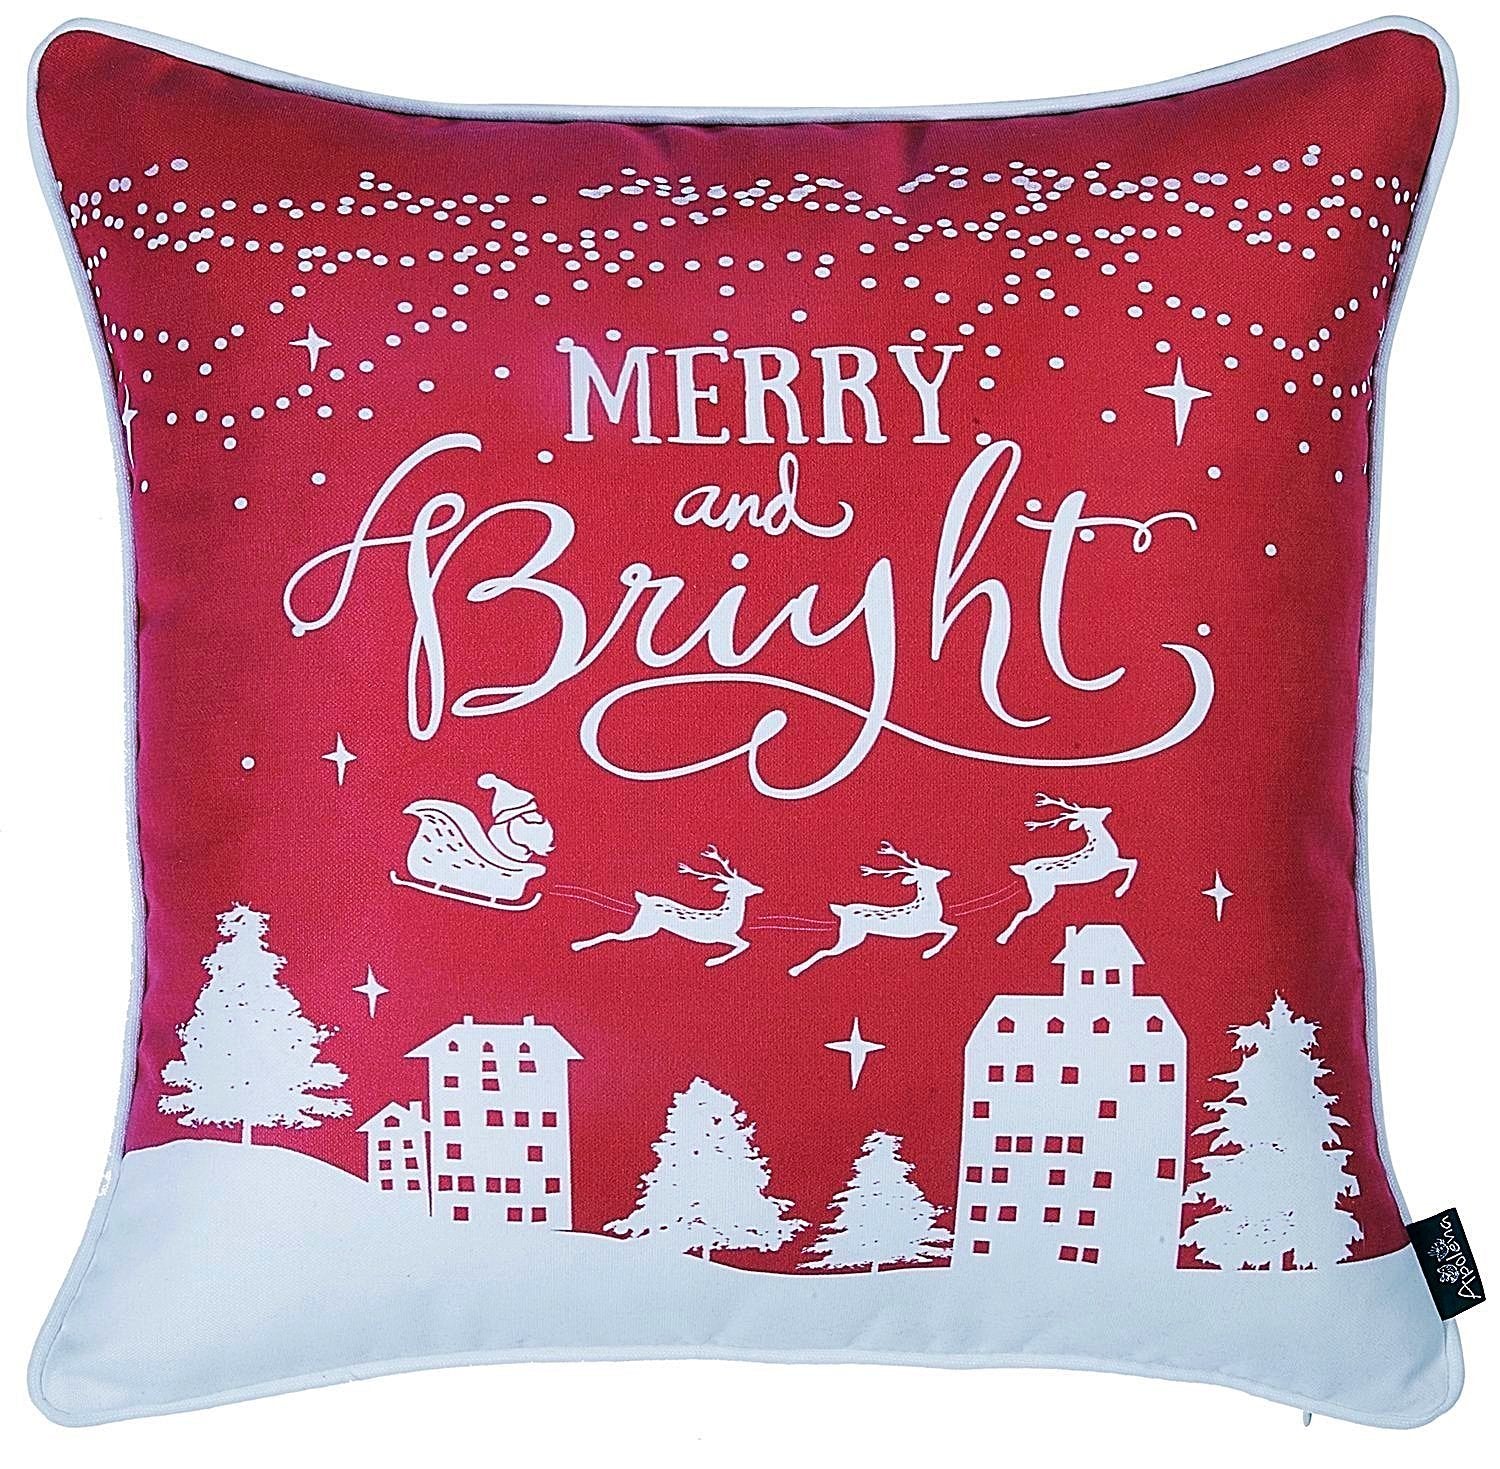 Set Of 4 18" Christmas Merry Bright Throw Pillow Cover In Multicolor